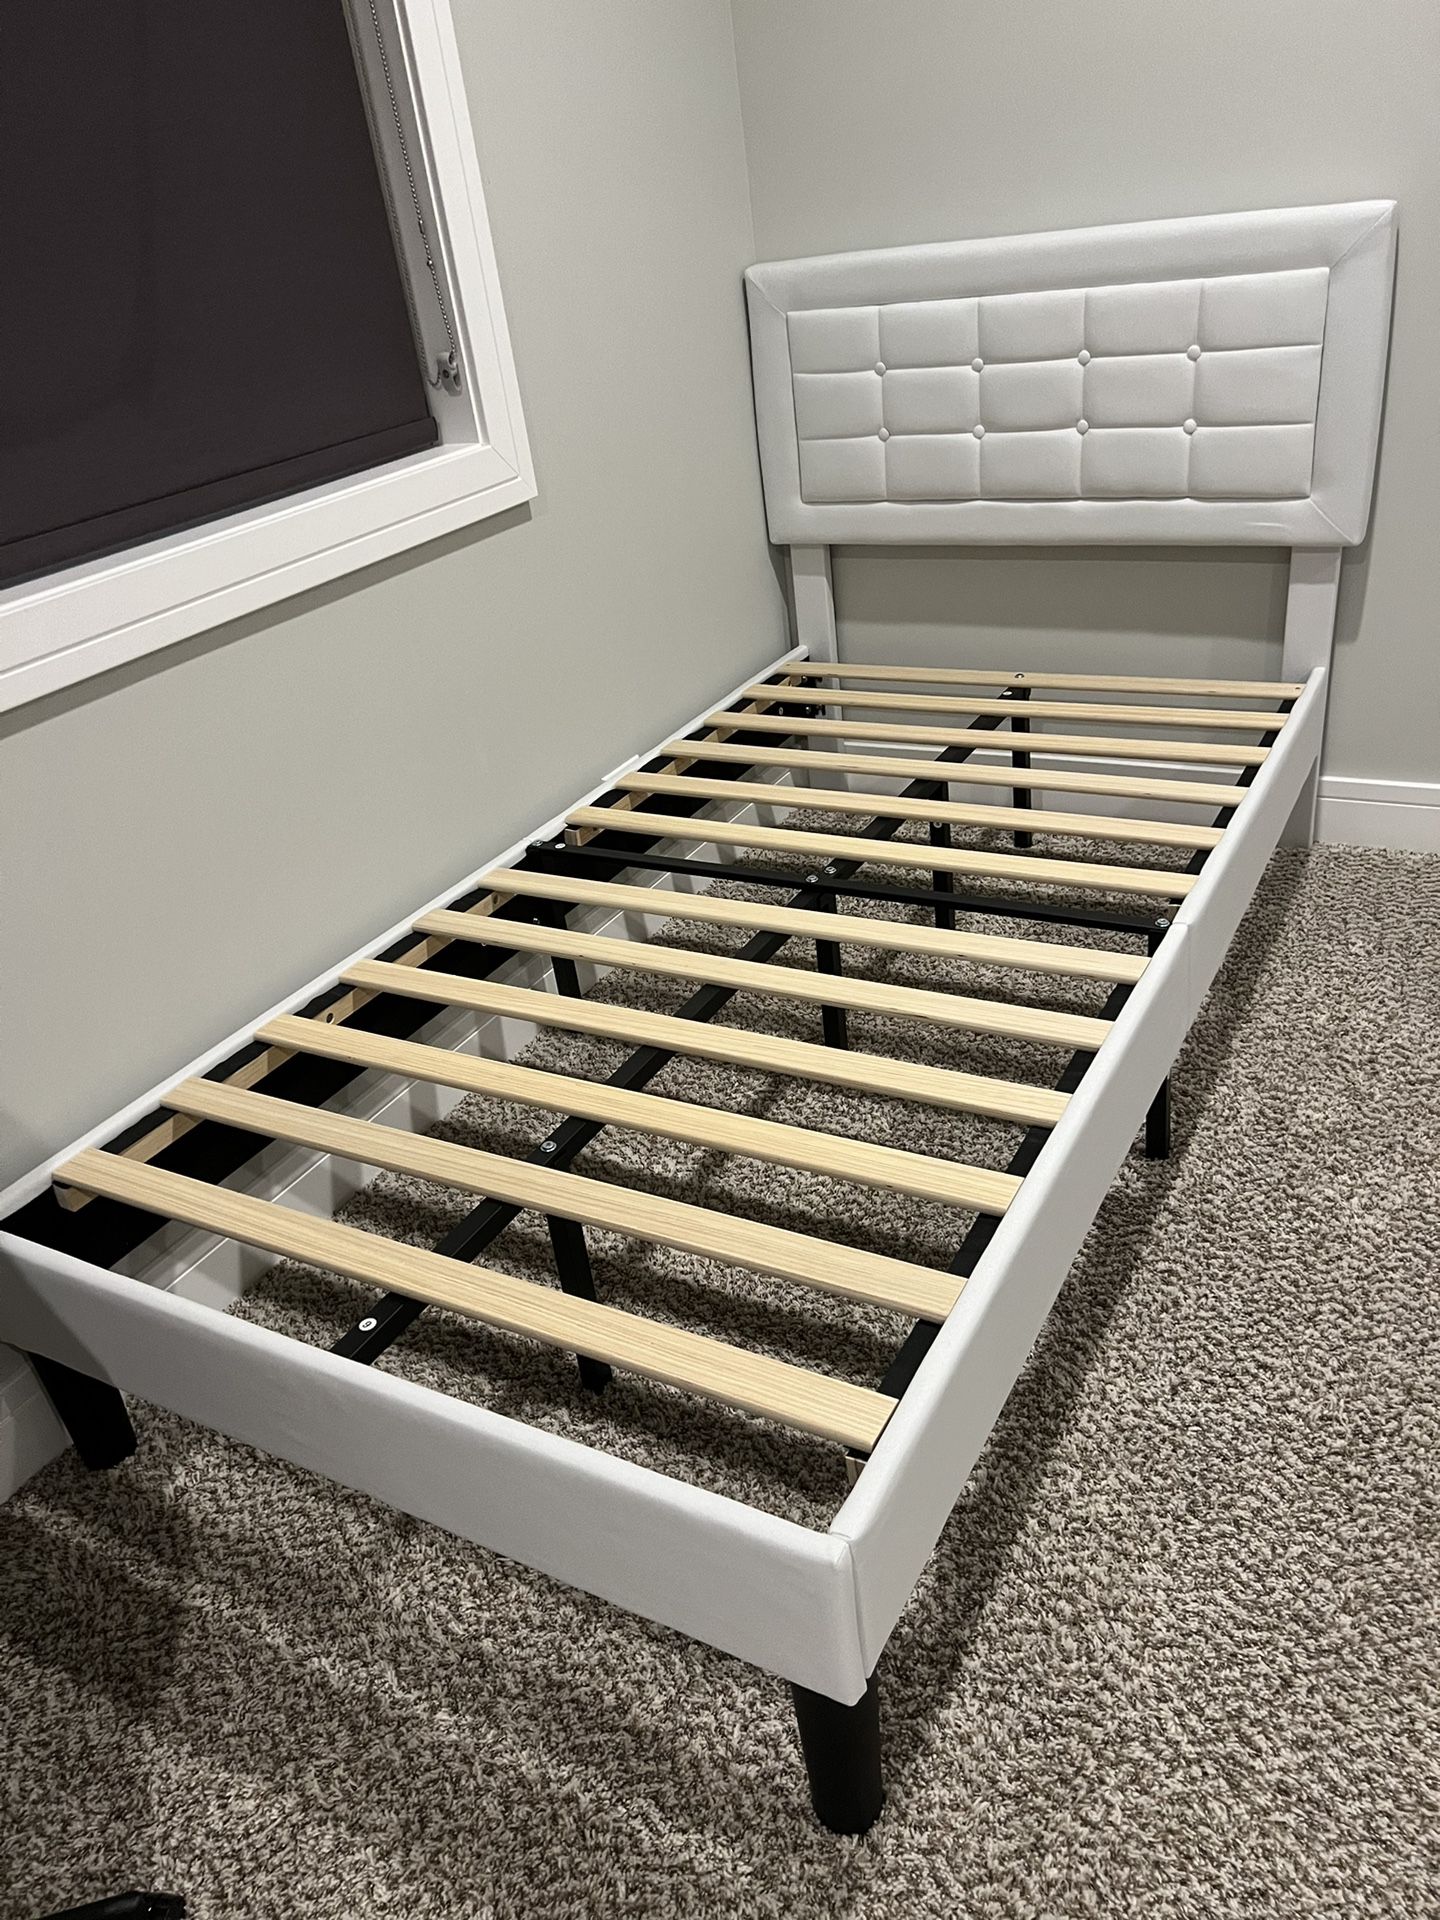 BRAND NEW TWIN SIZE BED FRAME 